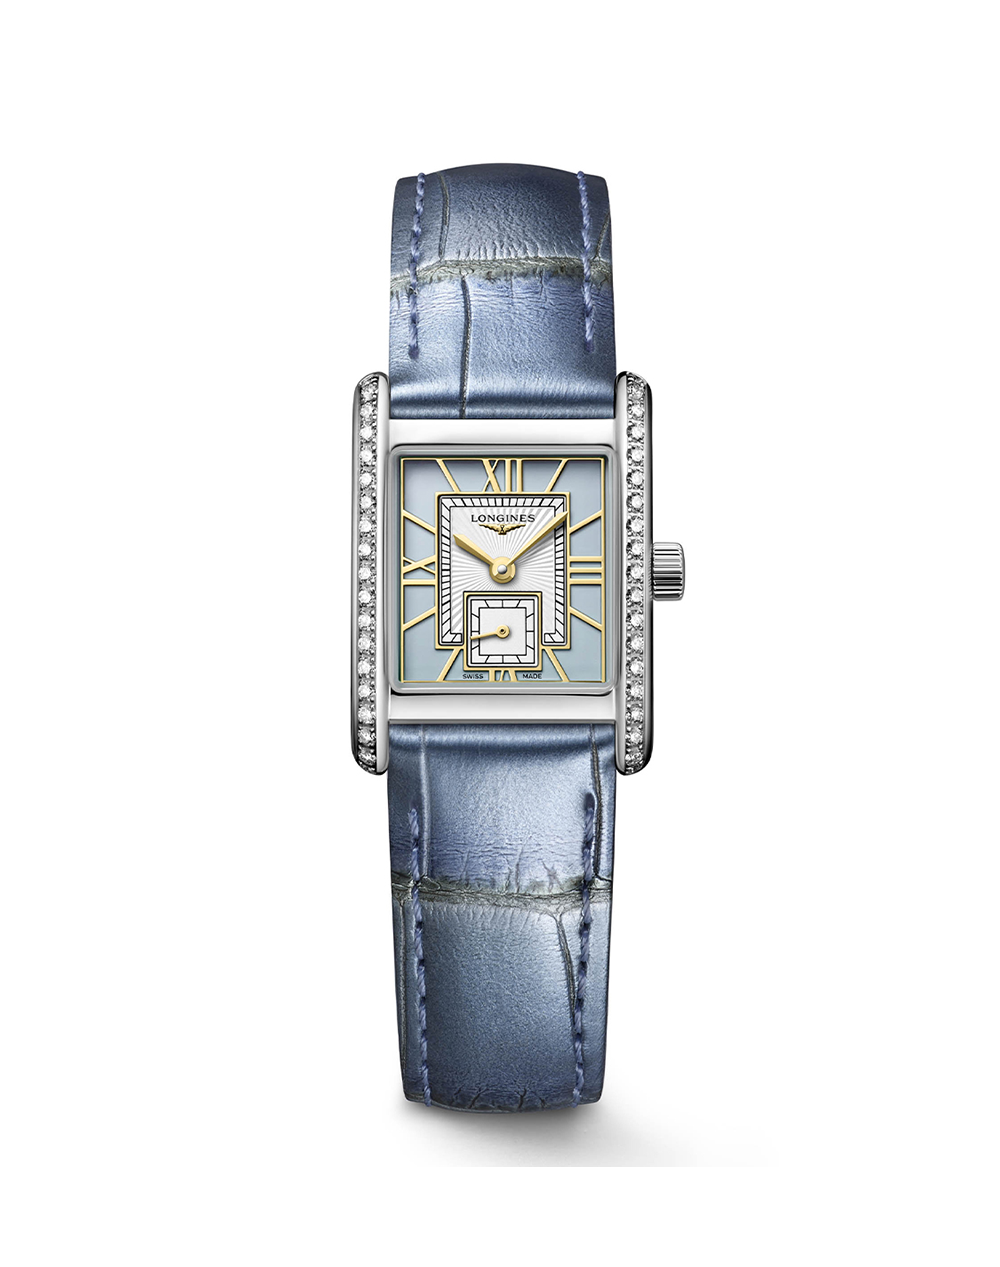 Longines Mini DolceVita 29mm Watch with Blue Dial